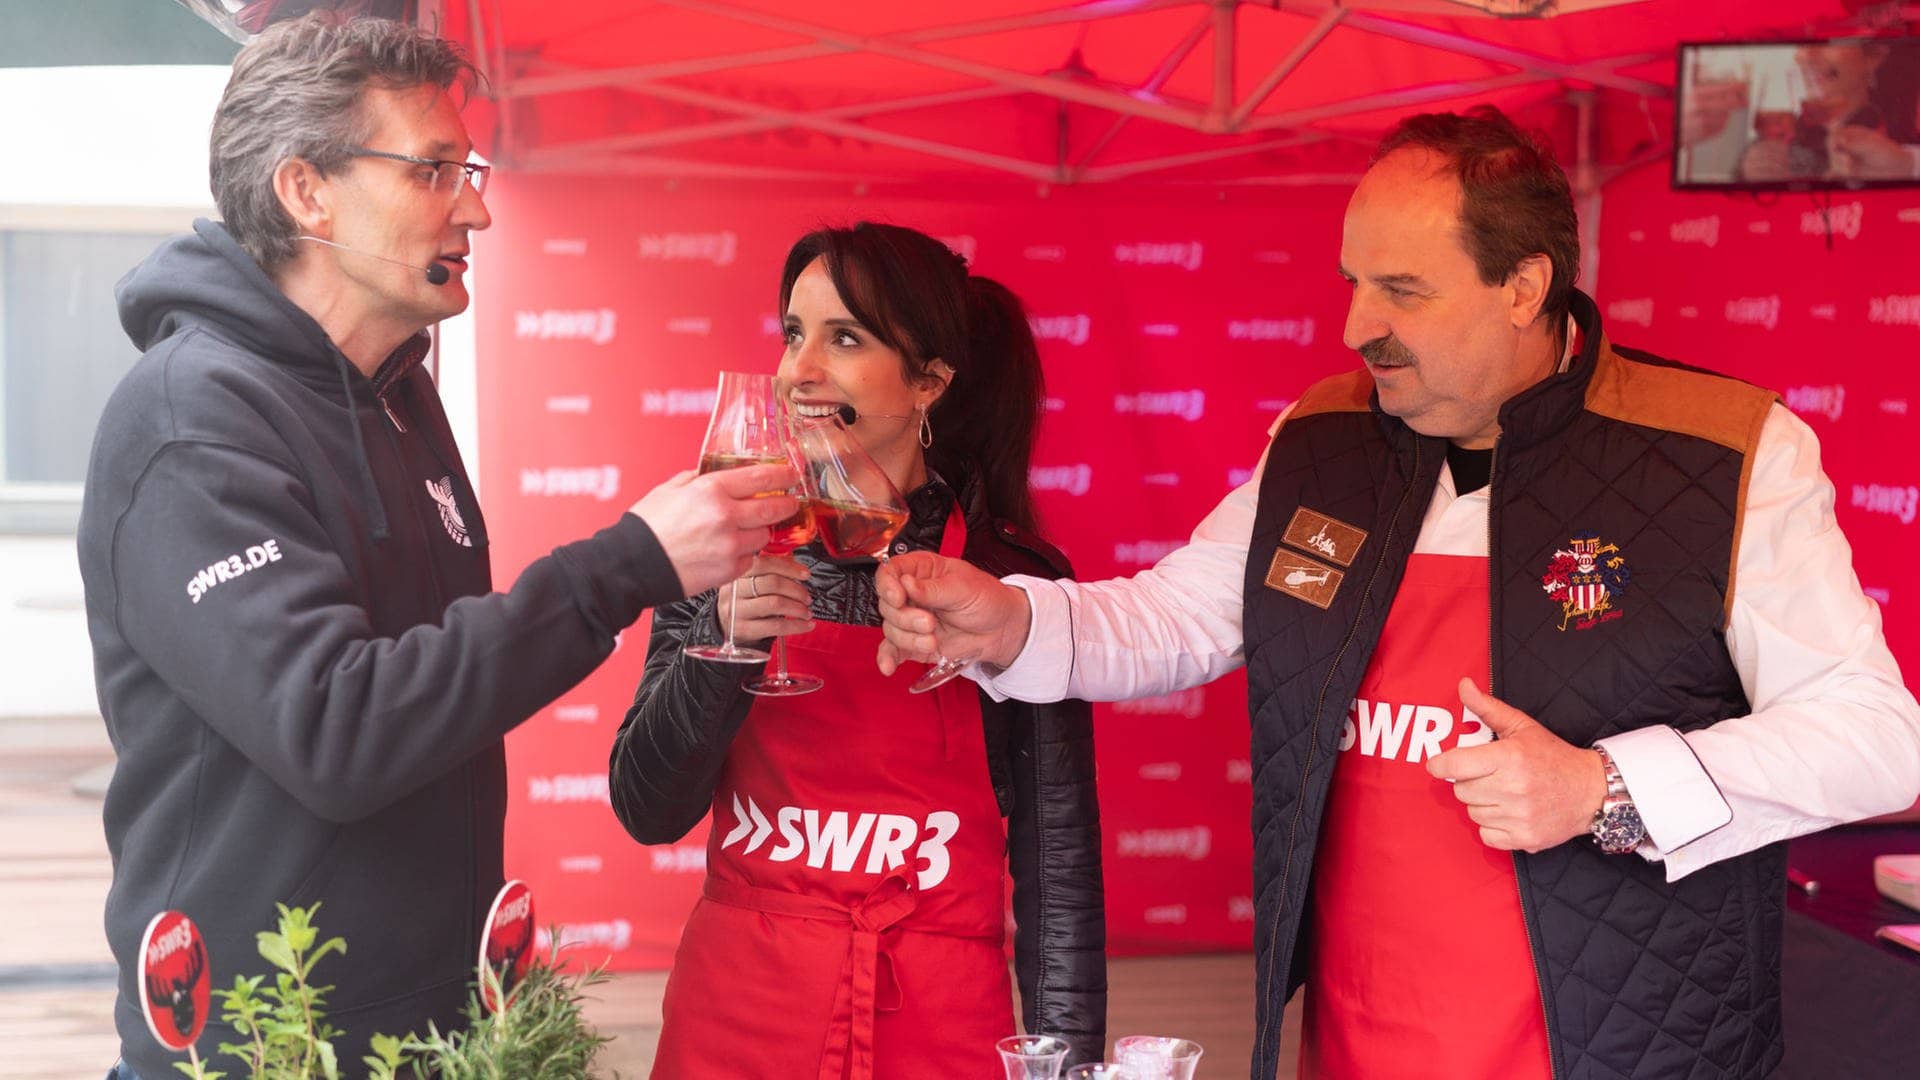 SWR3 Grillparty: Vorspeise